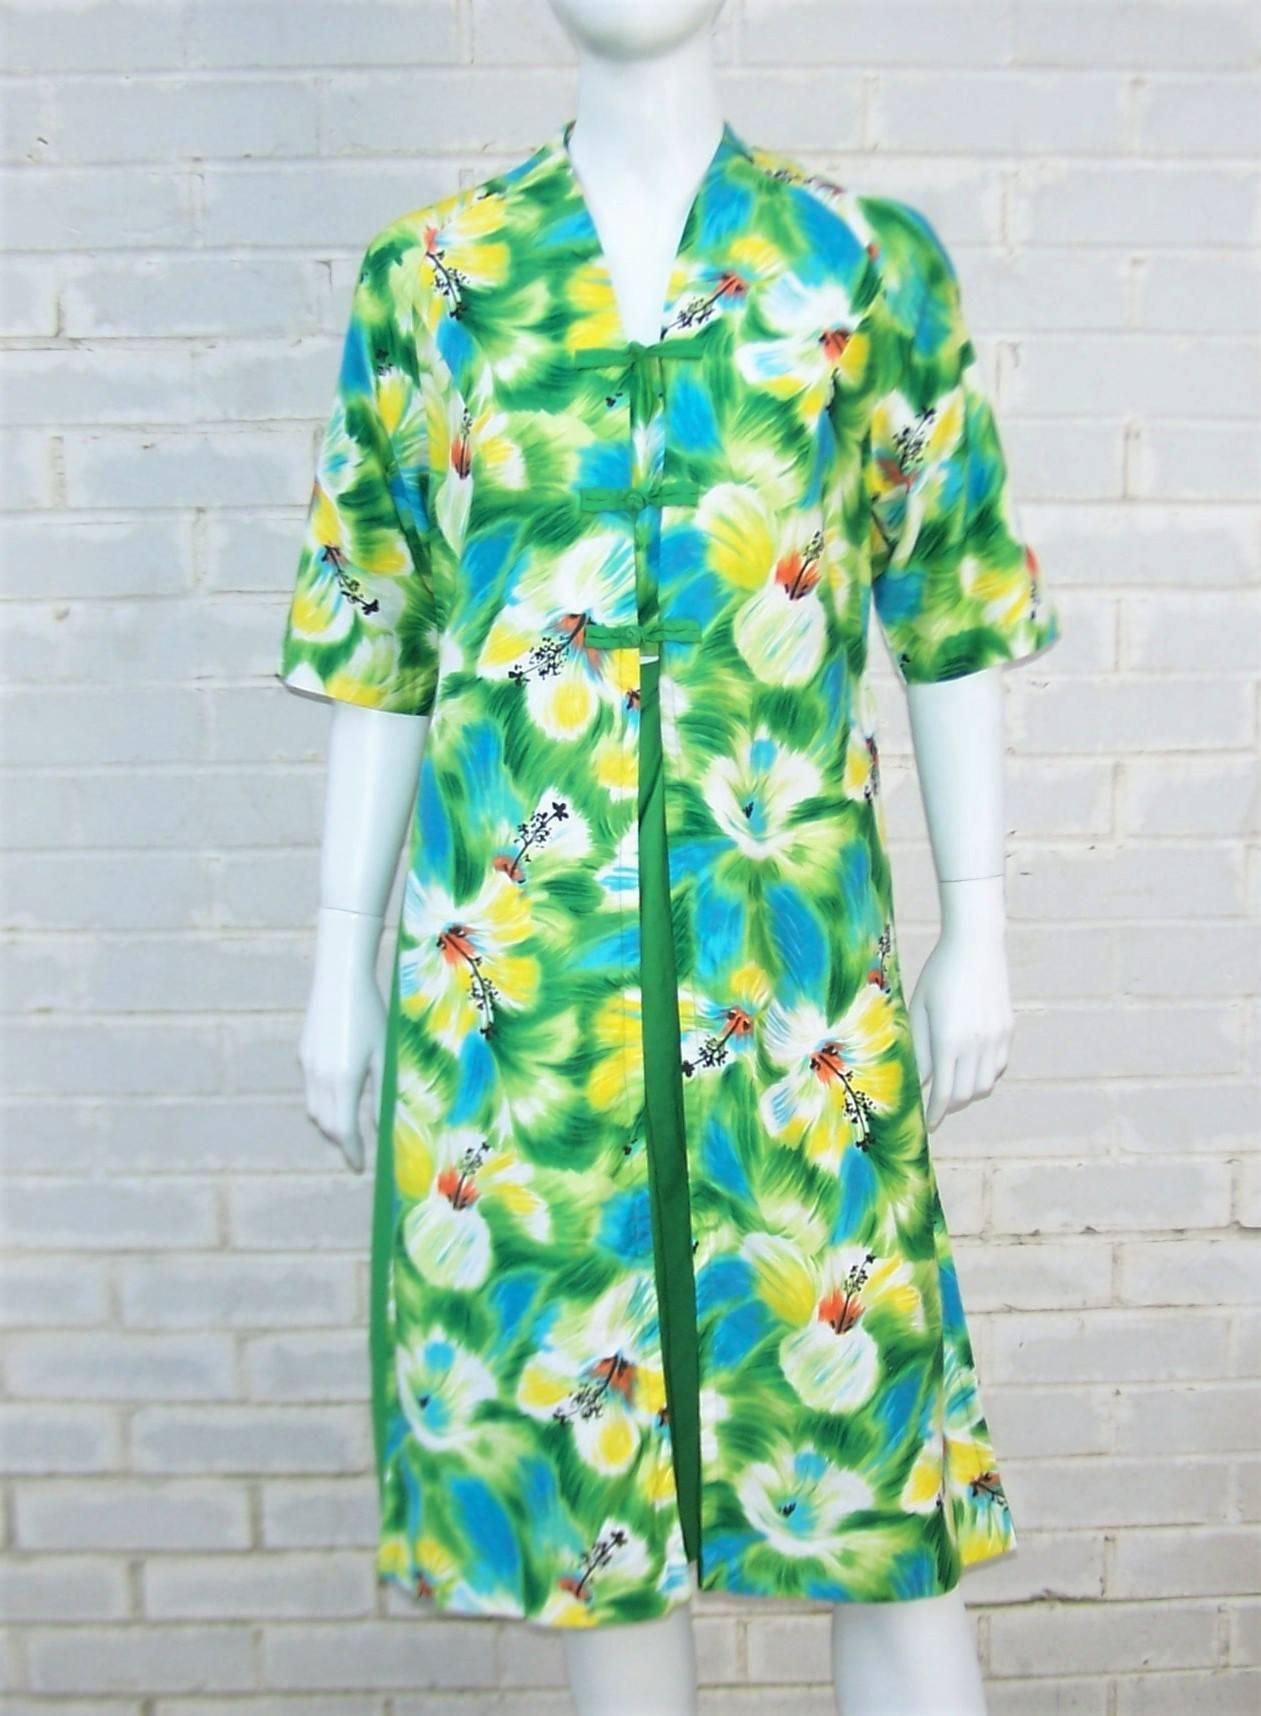 Aloha!  Relax island style in this 1950's polished cotton dress from Kamehameha of Hawaii ... a manufacturer of island inspired fashions best known for their vibrant tropical fabrics.  This casual dress has a comfy loose fit perfect for warm weather